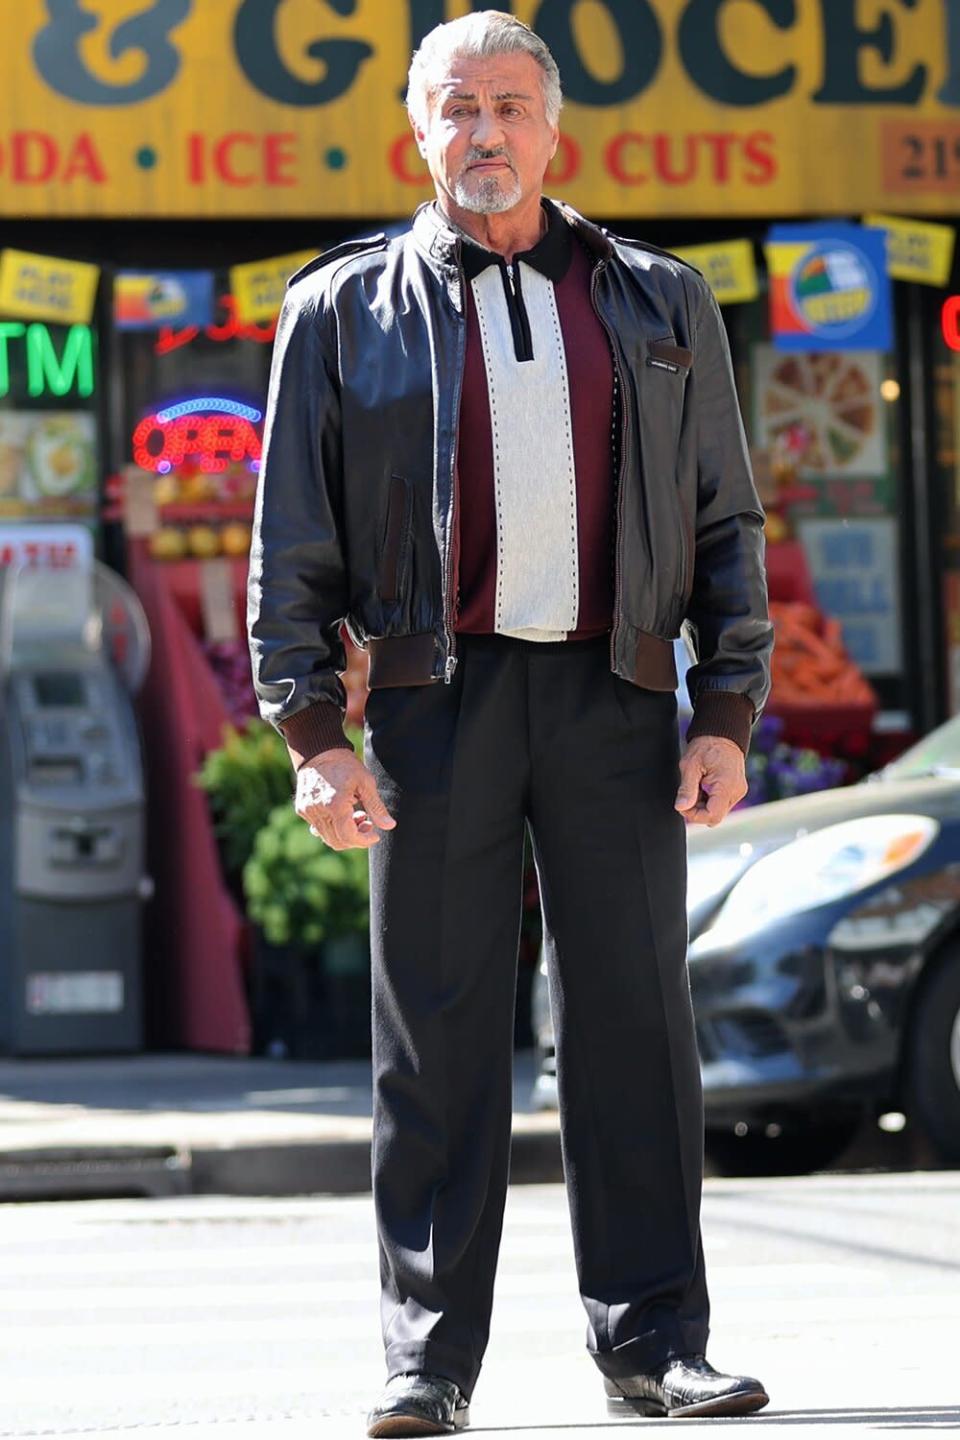 Sylvester Stallone is seen on the film set of the &quot;Tulsa King&quot; TV series on May 18, 2022 in the Brooklyn borough of New York City.